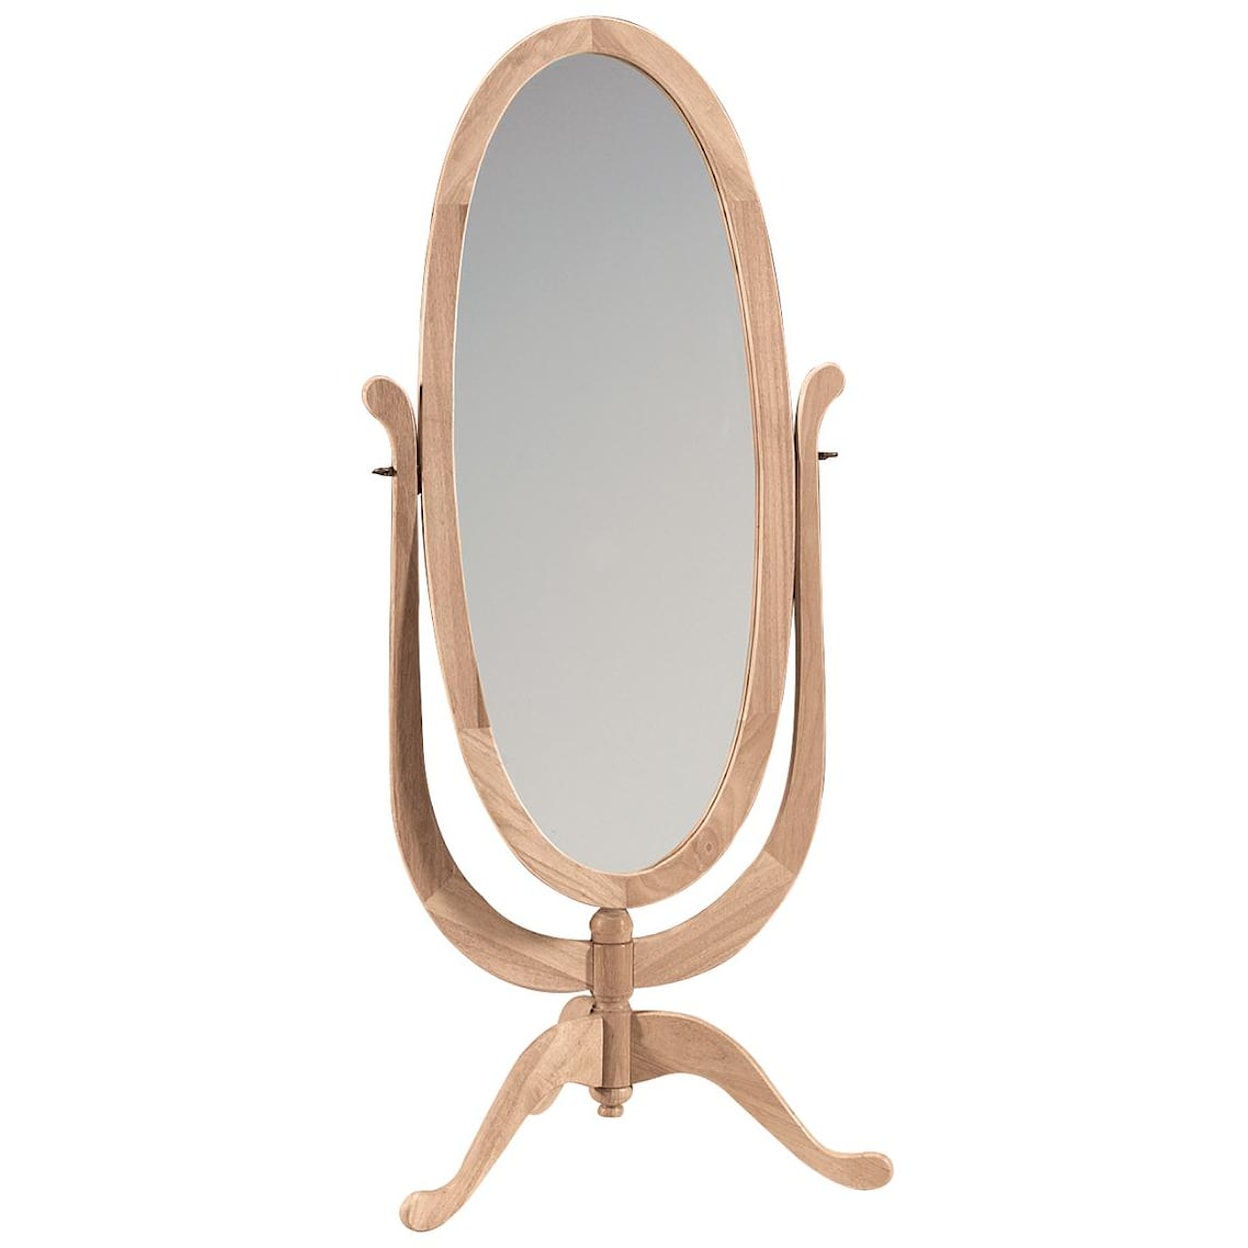 John Thomas SELECT Occasional & Accents Victorian Cheval Mirror